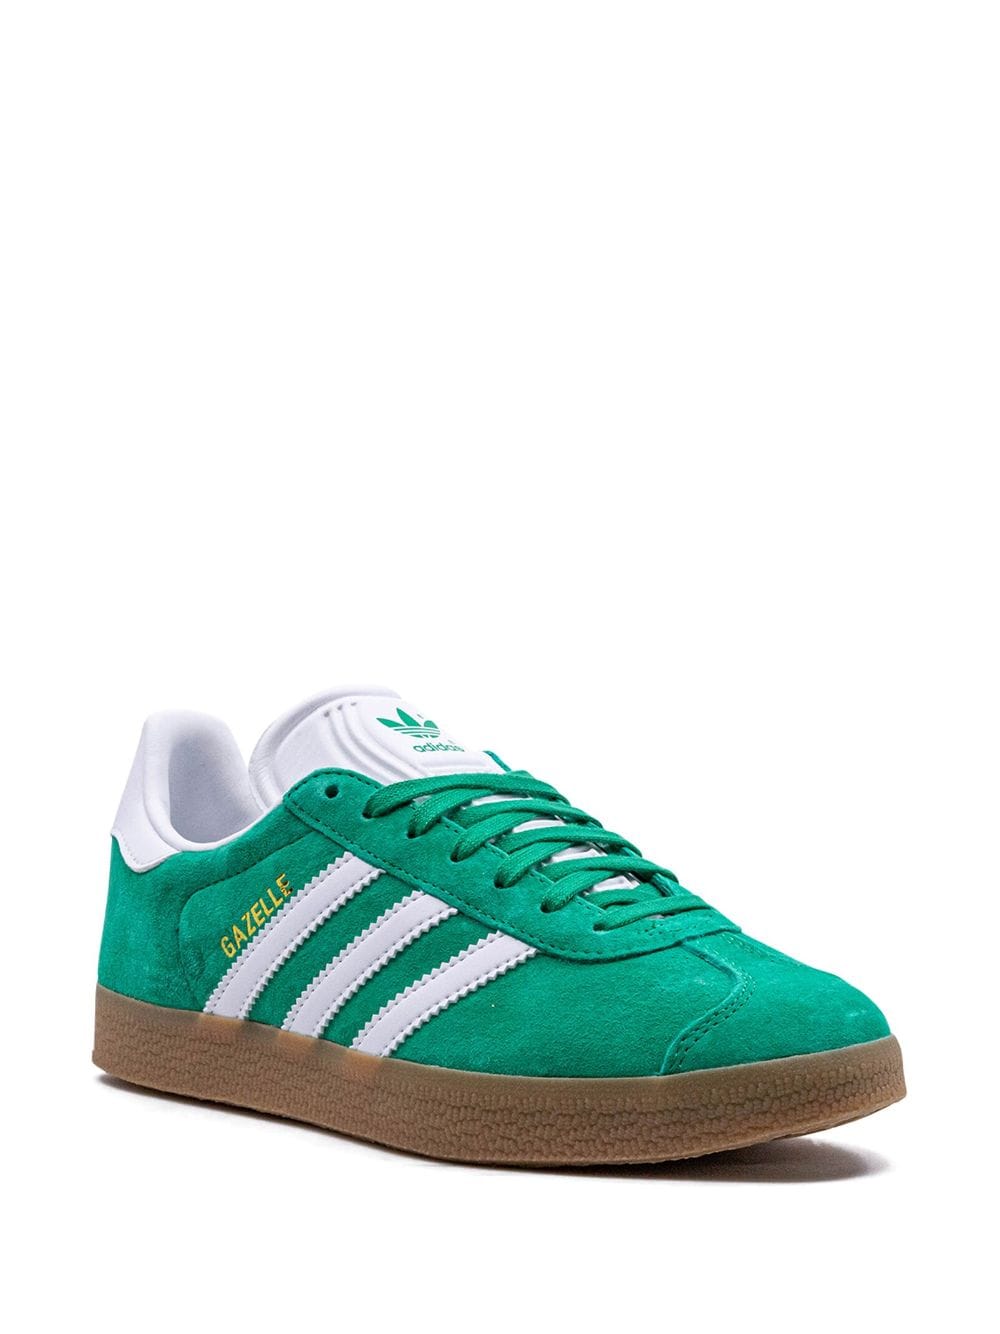 Image 2 of adidas "Gazelle ""Court Green"" sneakers"